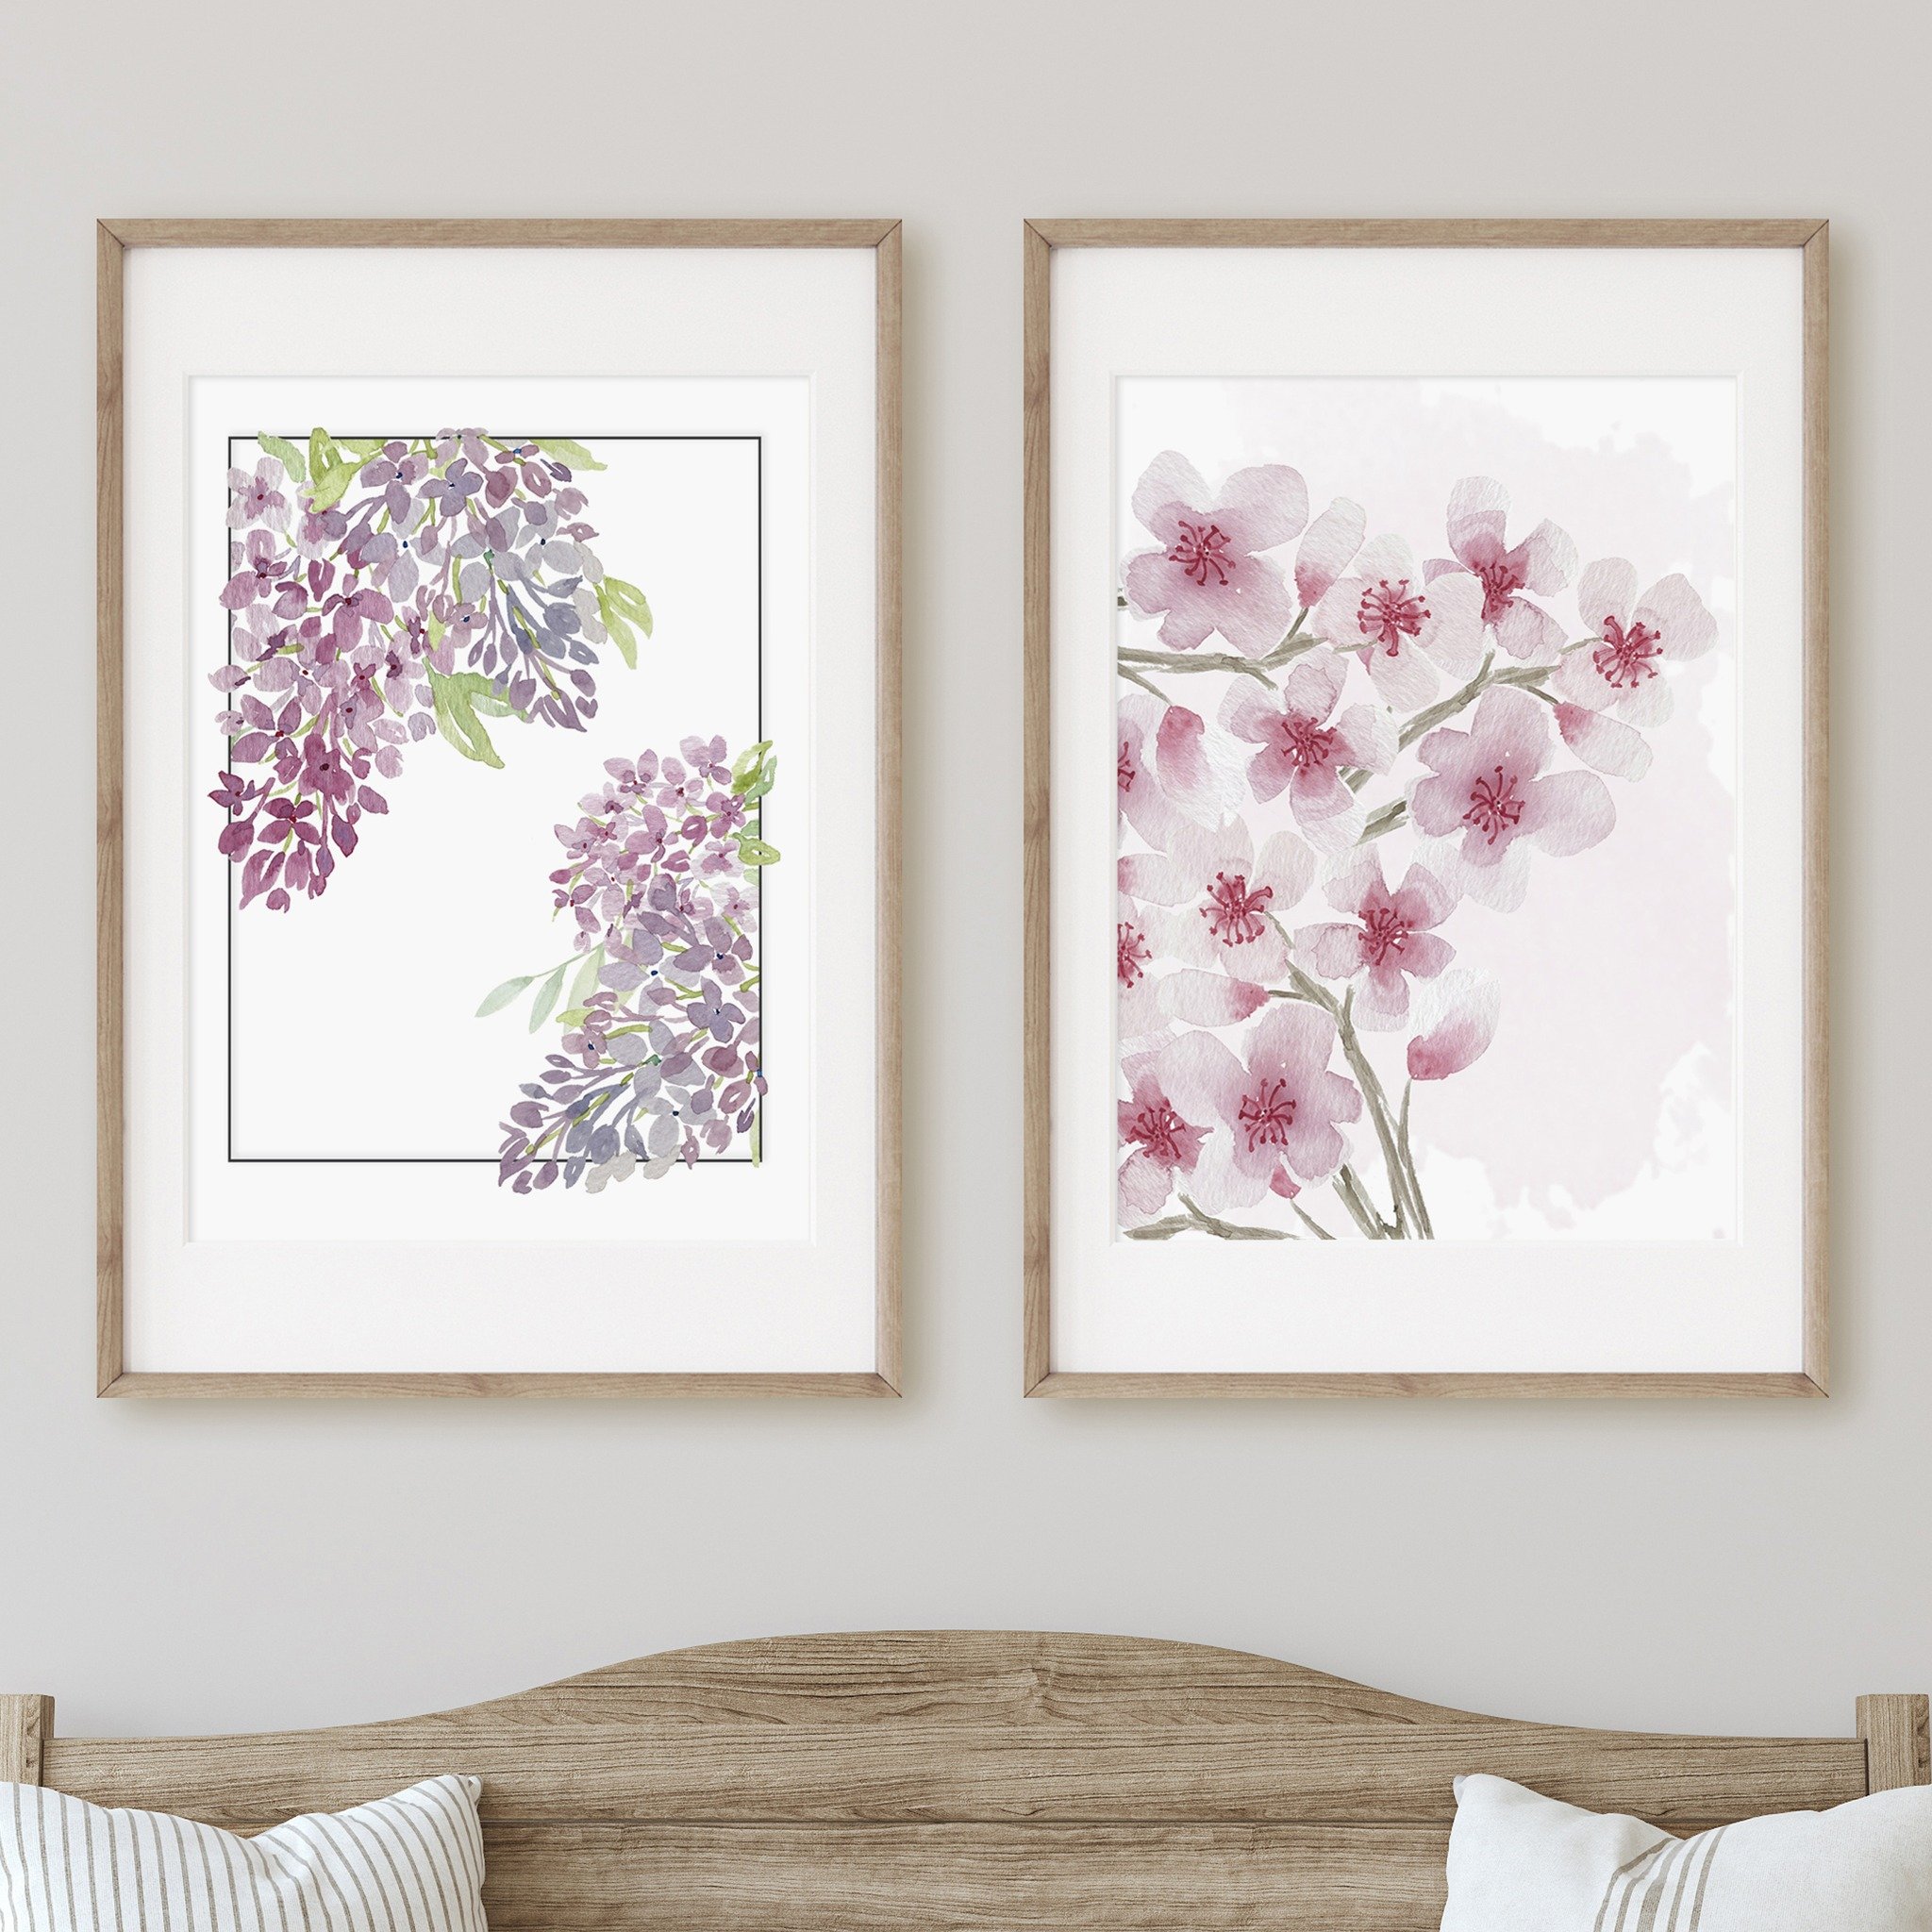 Flowers don't just have to bloom outside! Bring spring indoors with this set of hand painted watercolor Cherry Blossoms and Lilacs, perfect for a gentle touch of color and spring in your home 🌸

#fineartprints #watercolorprints #watercolorflowers #w